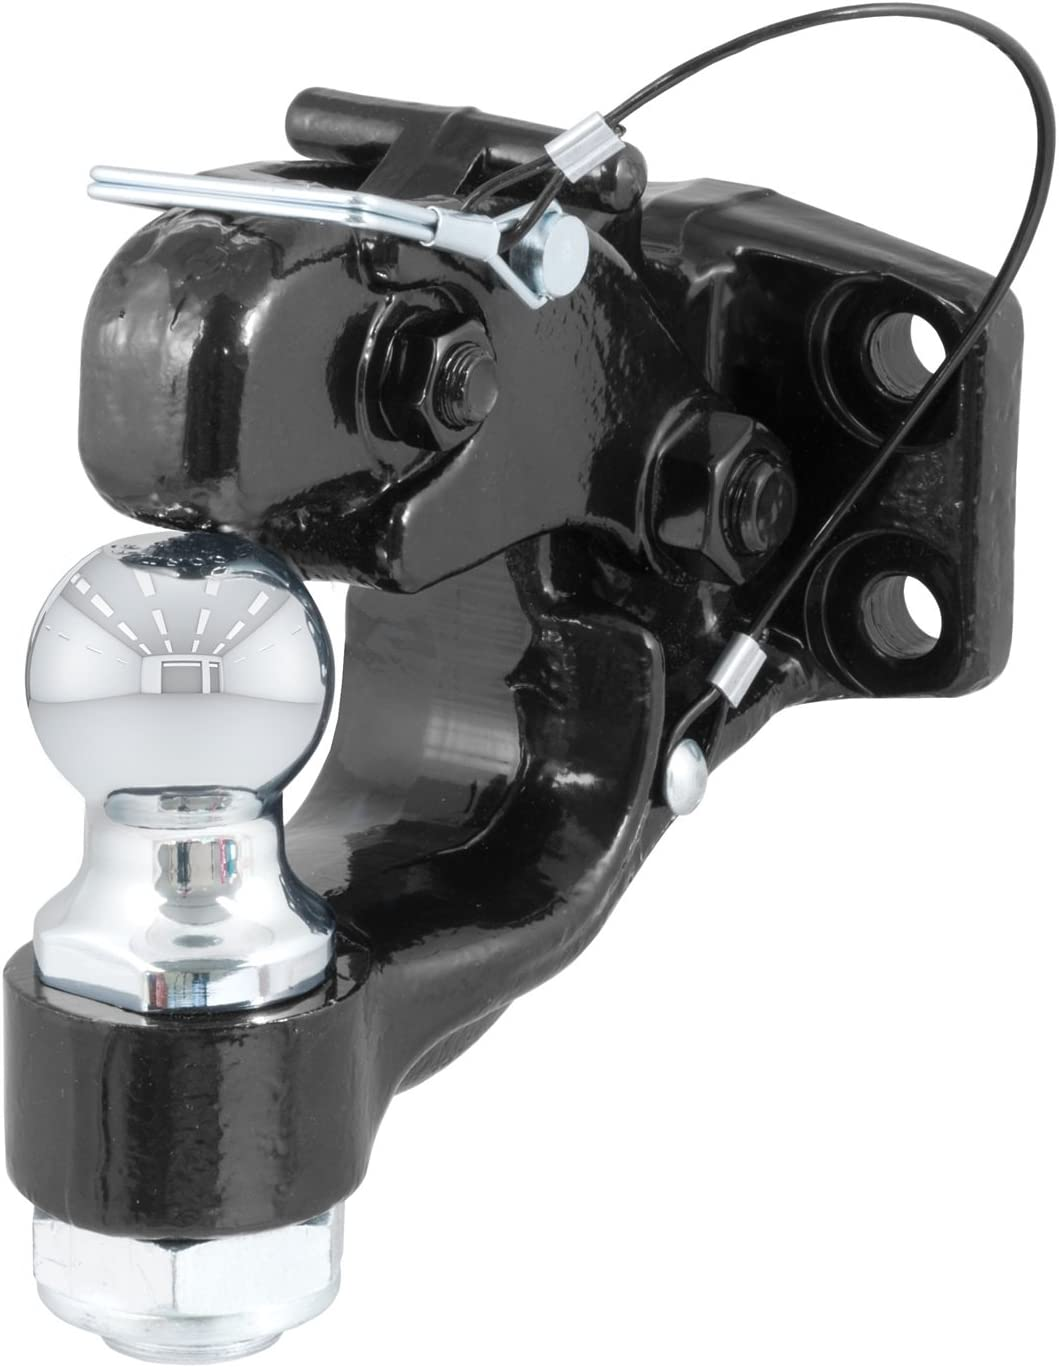 CURT 48180 Pintle Hitch with 1-7/8-Inch Trailer Ball